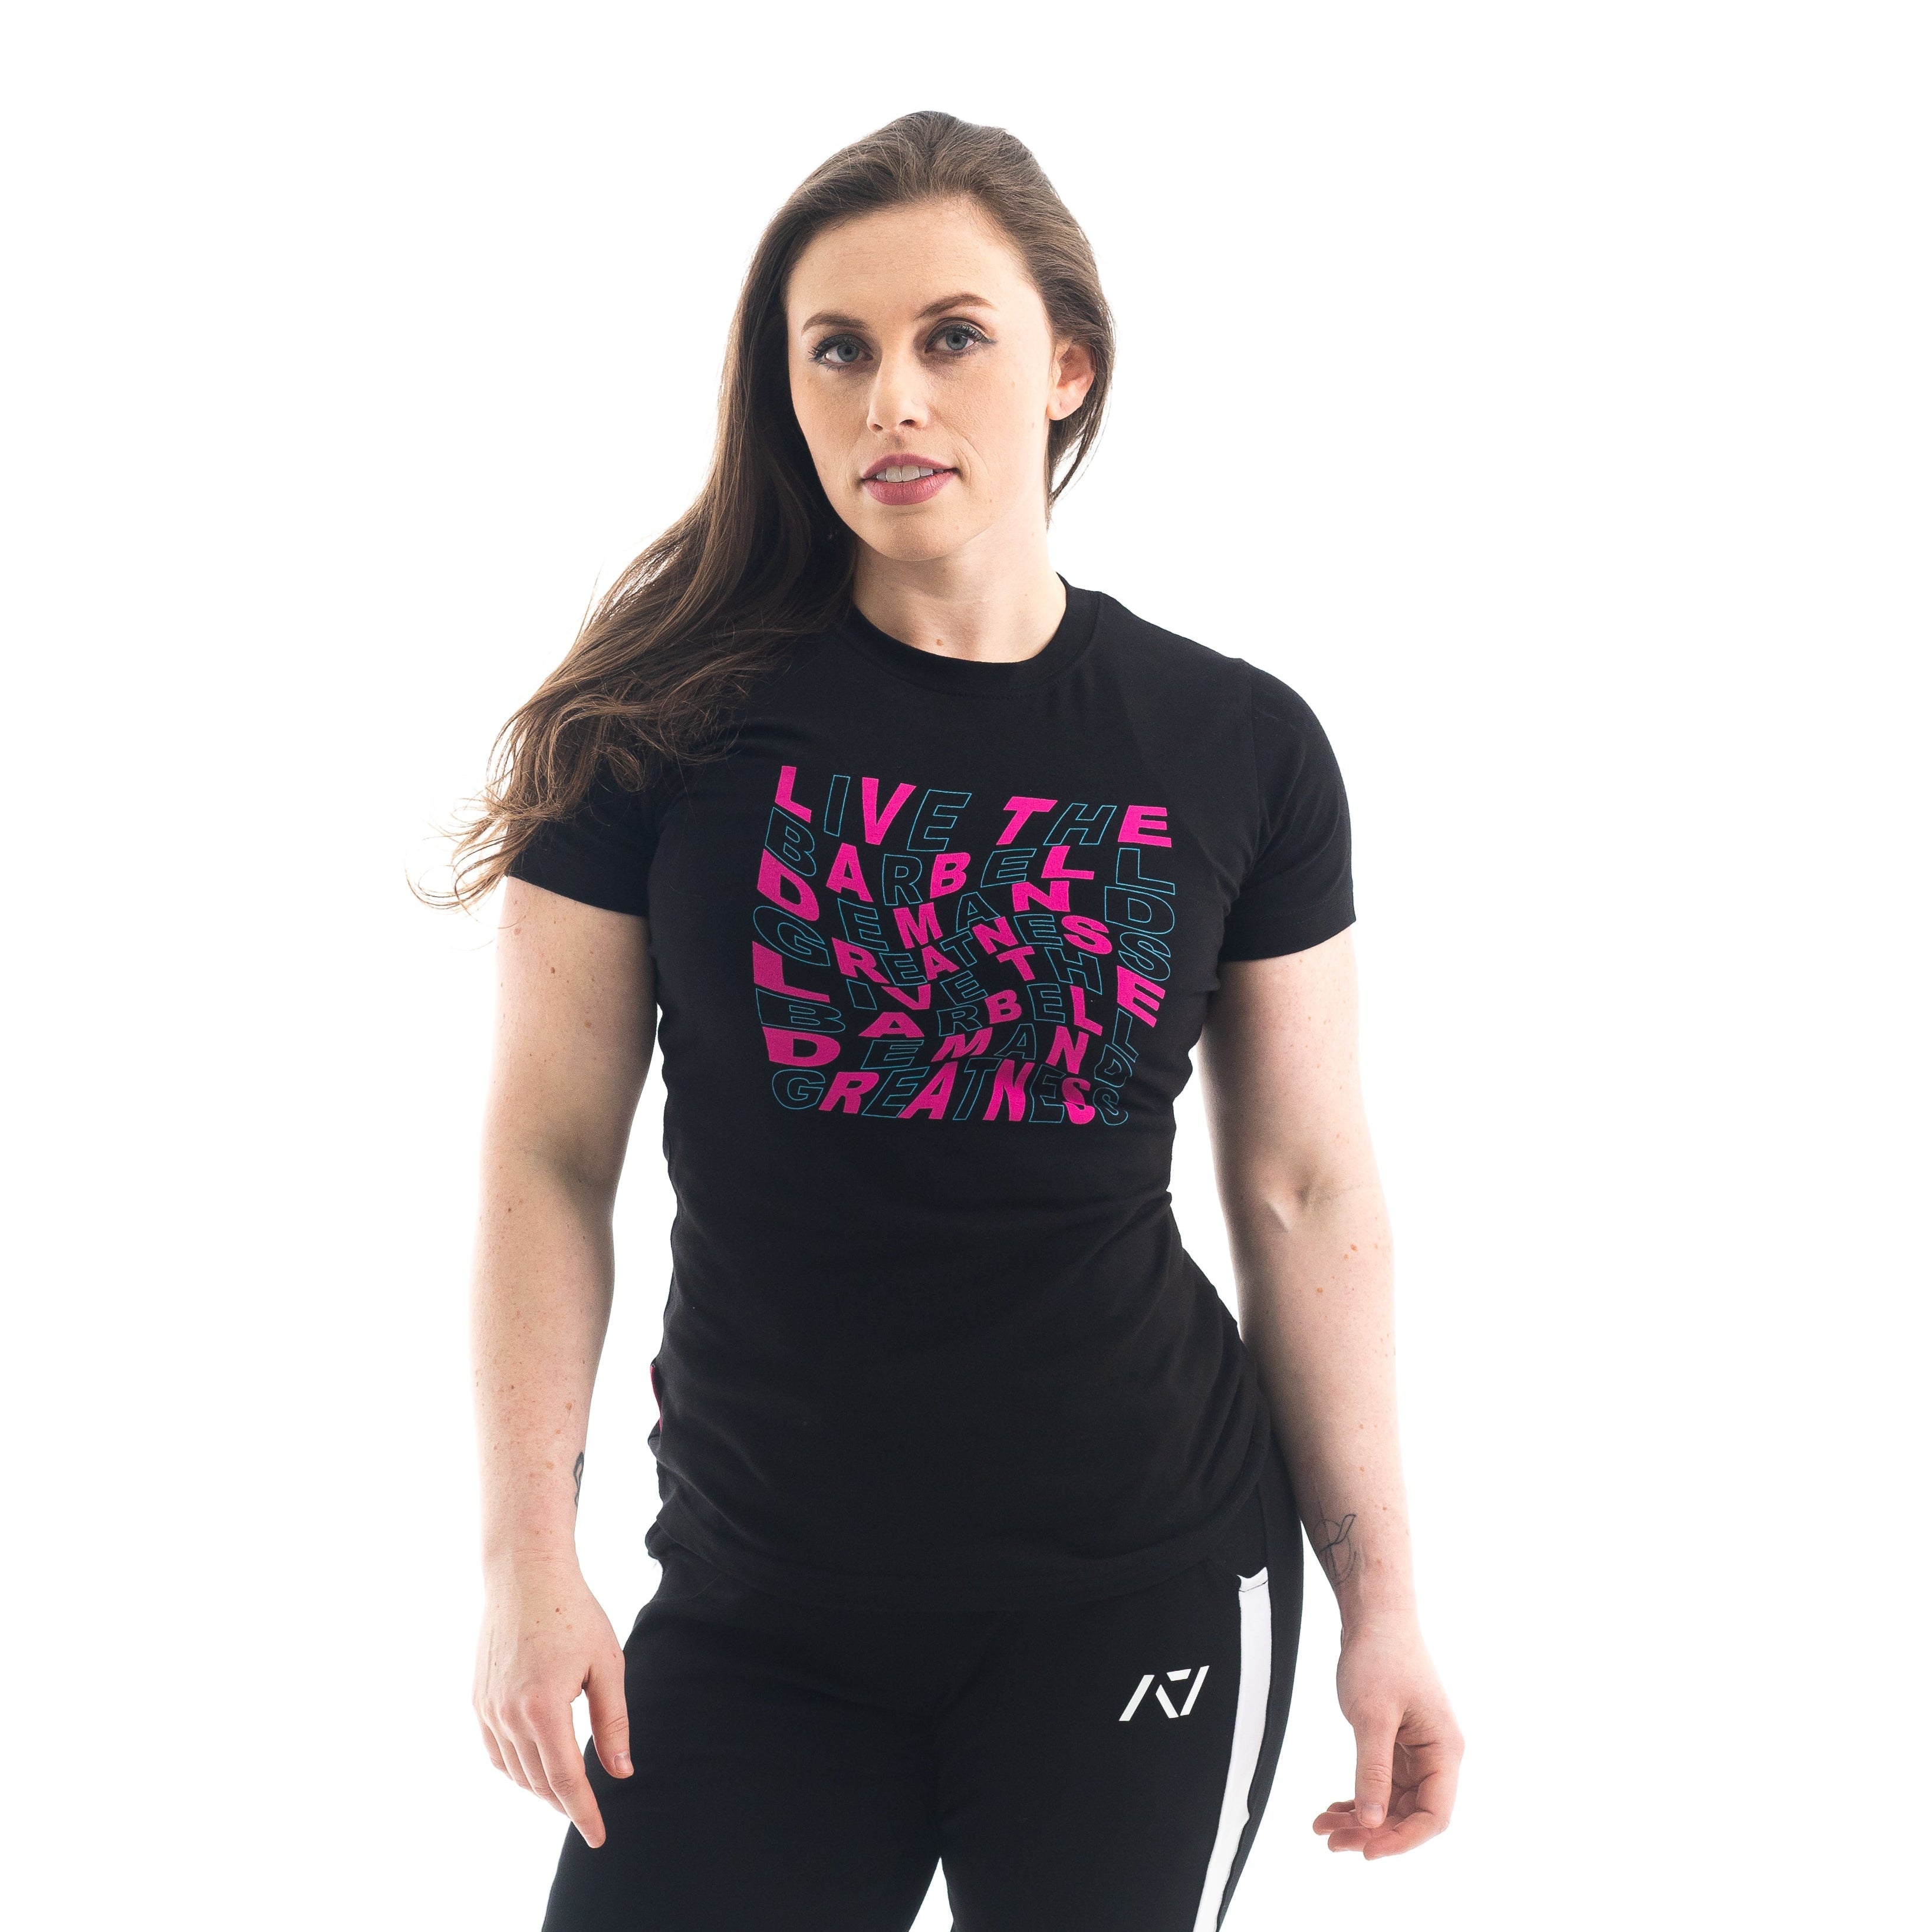 VorText Flamingo Women's Bar Grip Shirt. Make a stand on the platform as you continue to approach perfection to prove you are not of this world. Whether pressing, pulling, squatting or any other variational movement the knurling is always there. The silicone bar grip helps with slippery commercial benches and bars and anchors the barbell to your back. All A7 Powerlifting Equipment shipping to France, Spain, Ireland, Germany, Italy, Sweden and EU.